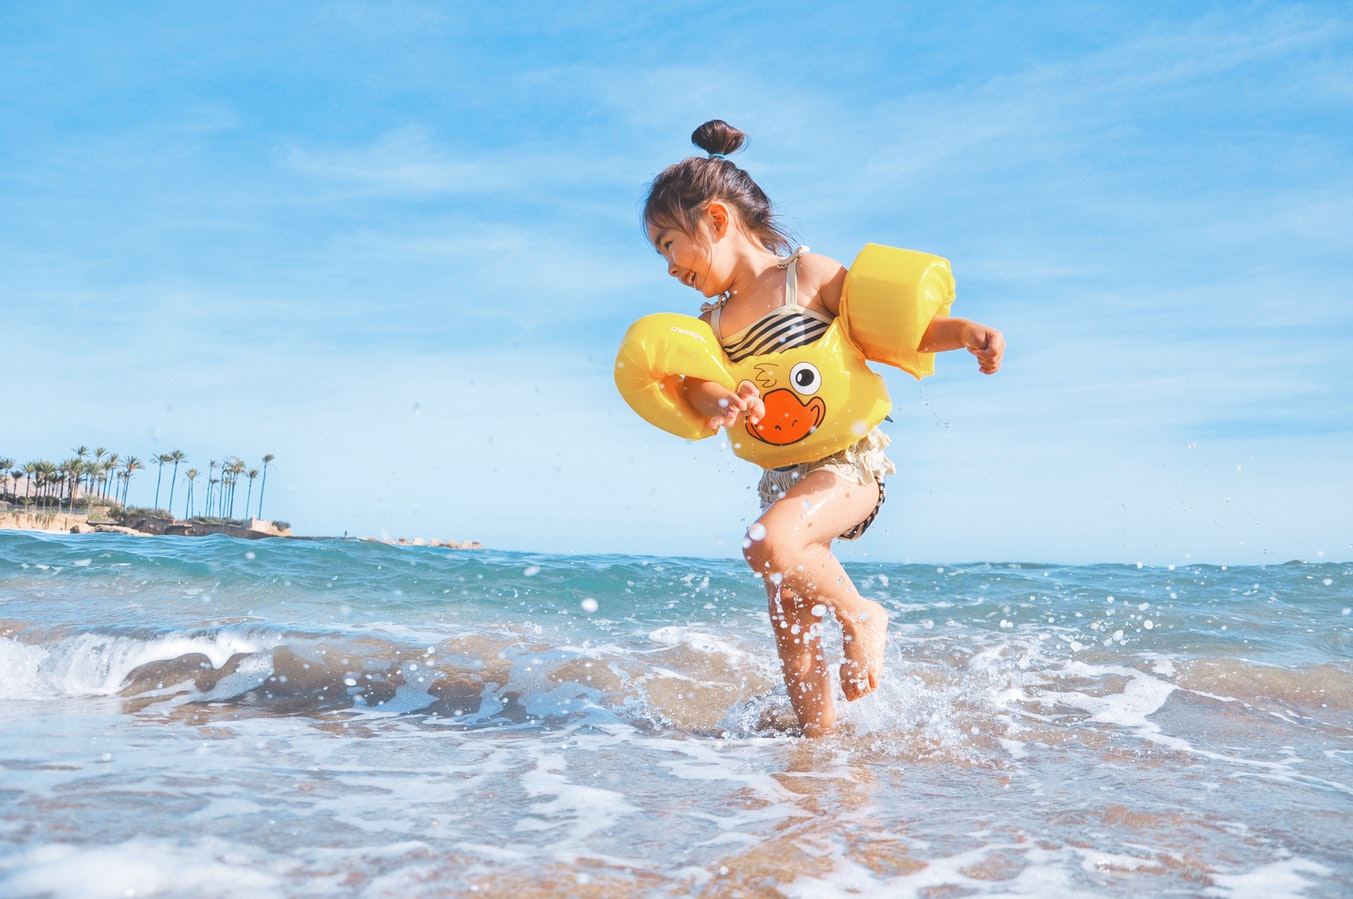 TIPS TO HELP YOUR KIDS HAVE A HEALTHY SUMMER